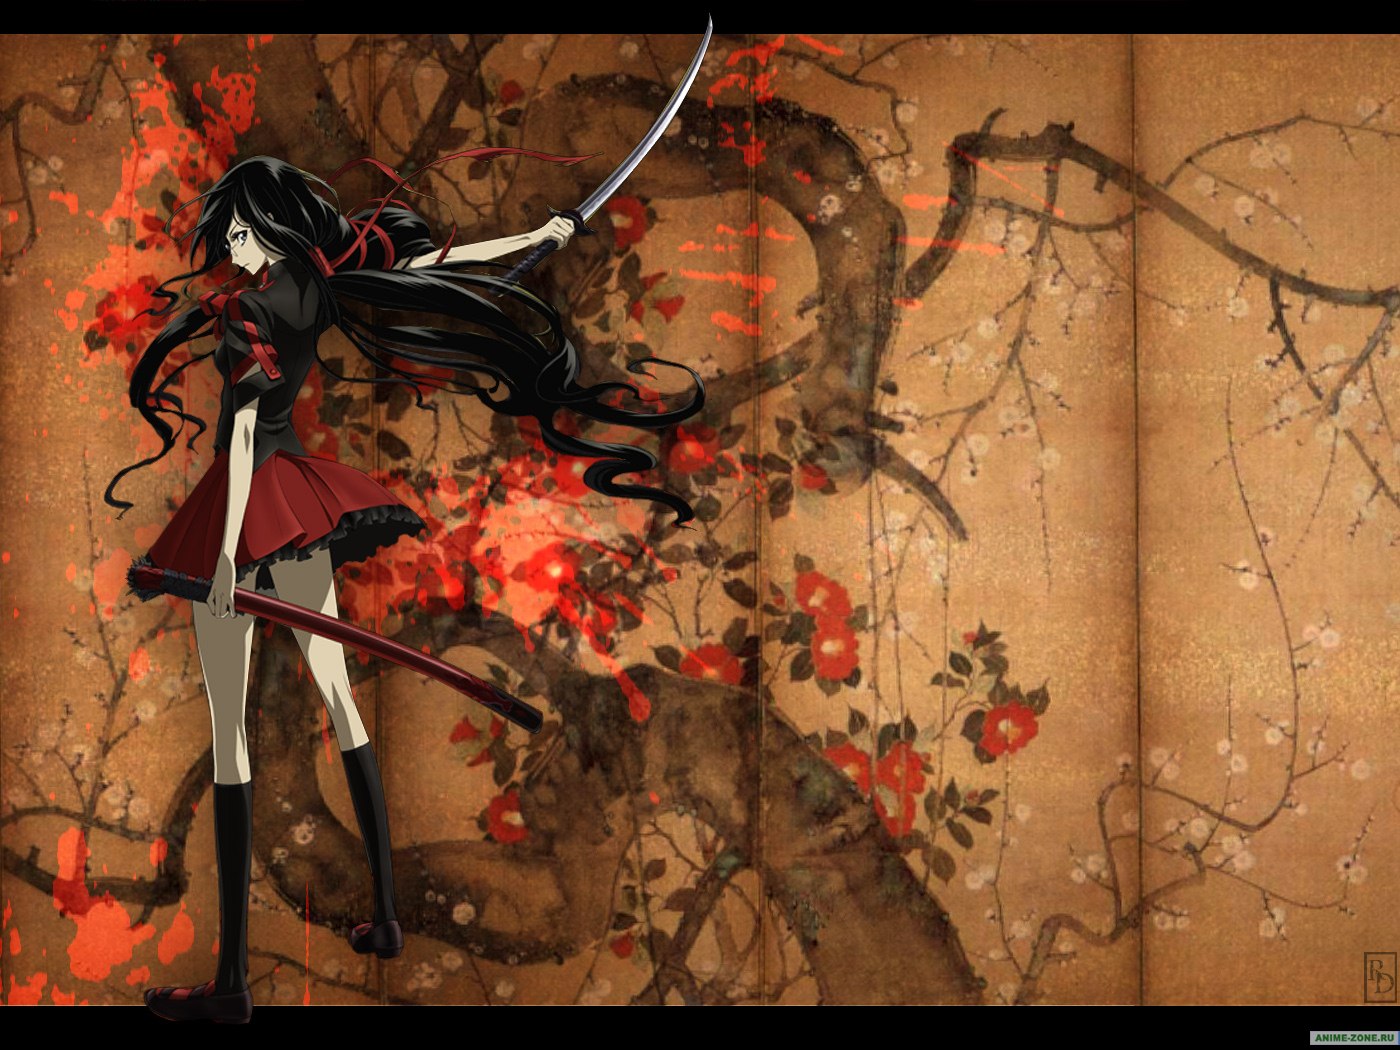 Dark-haired anime character with a sword and blood splatters, possibly Saya Kisaragi.